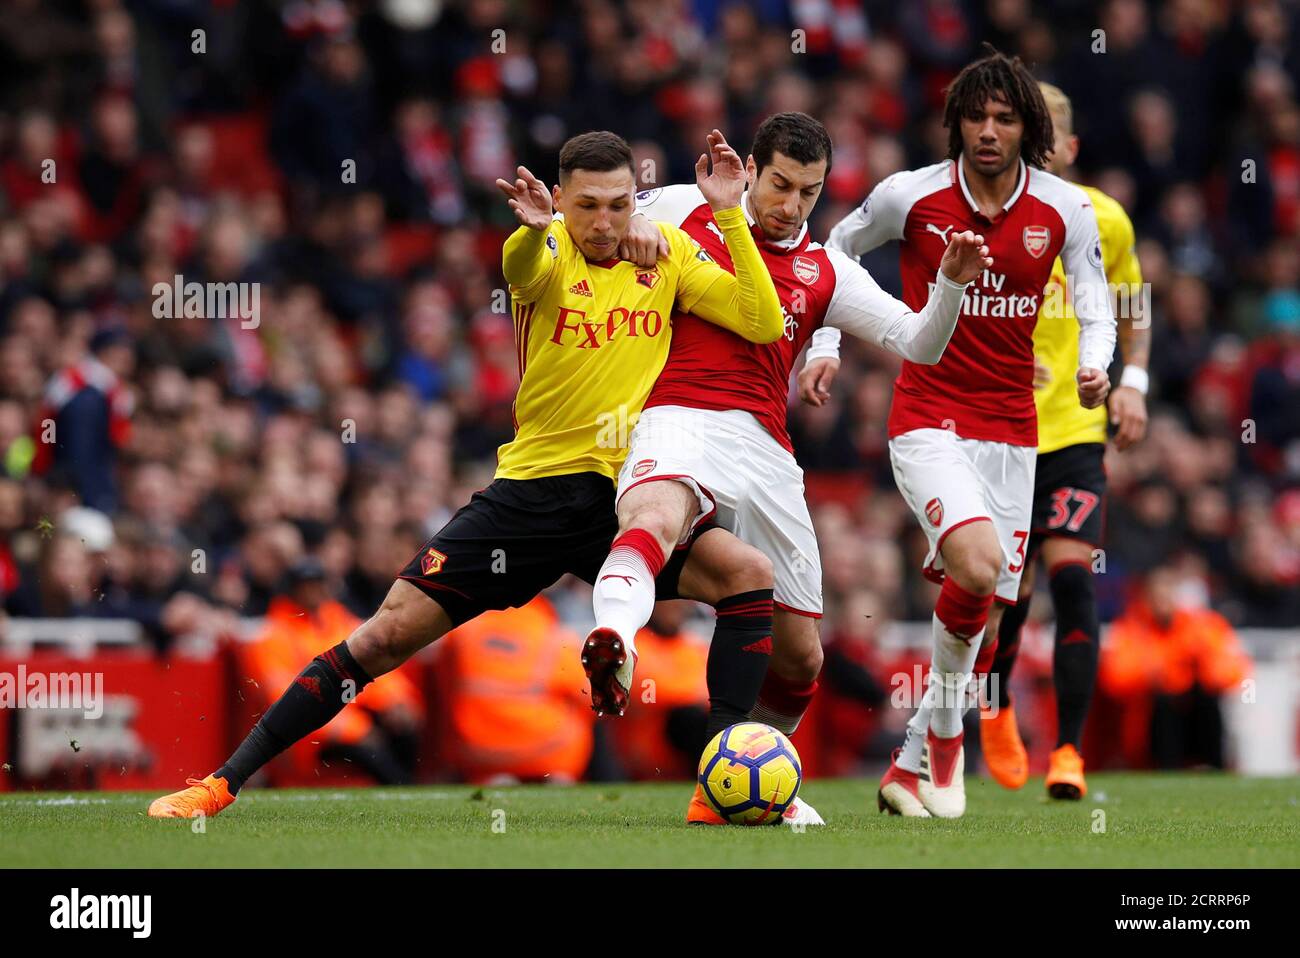 Soccer Football - Premier League - Arsenal vs Watford - Emirates Stadium, London, Britain - March 11, 2018   Arsenal's Henrikh Mkhitaryan in action with Watford's Jose Holebas           REUTERS/Eddie Keogh    EDITORIAL USE ONLY. No use with unauthorized audio, video, data, fixture lists, club/league logos or 'live' services. Online in-match use limited to 75 images, no video emulation. No use in betting, games or single club/league/player publications.  Please contact your account representative for further details. Stock Photo